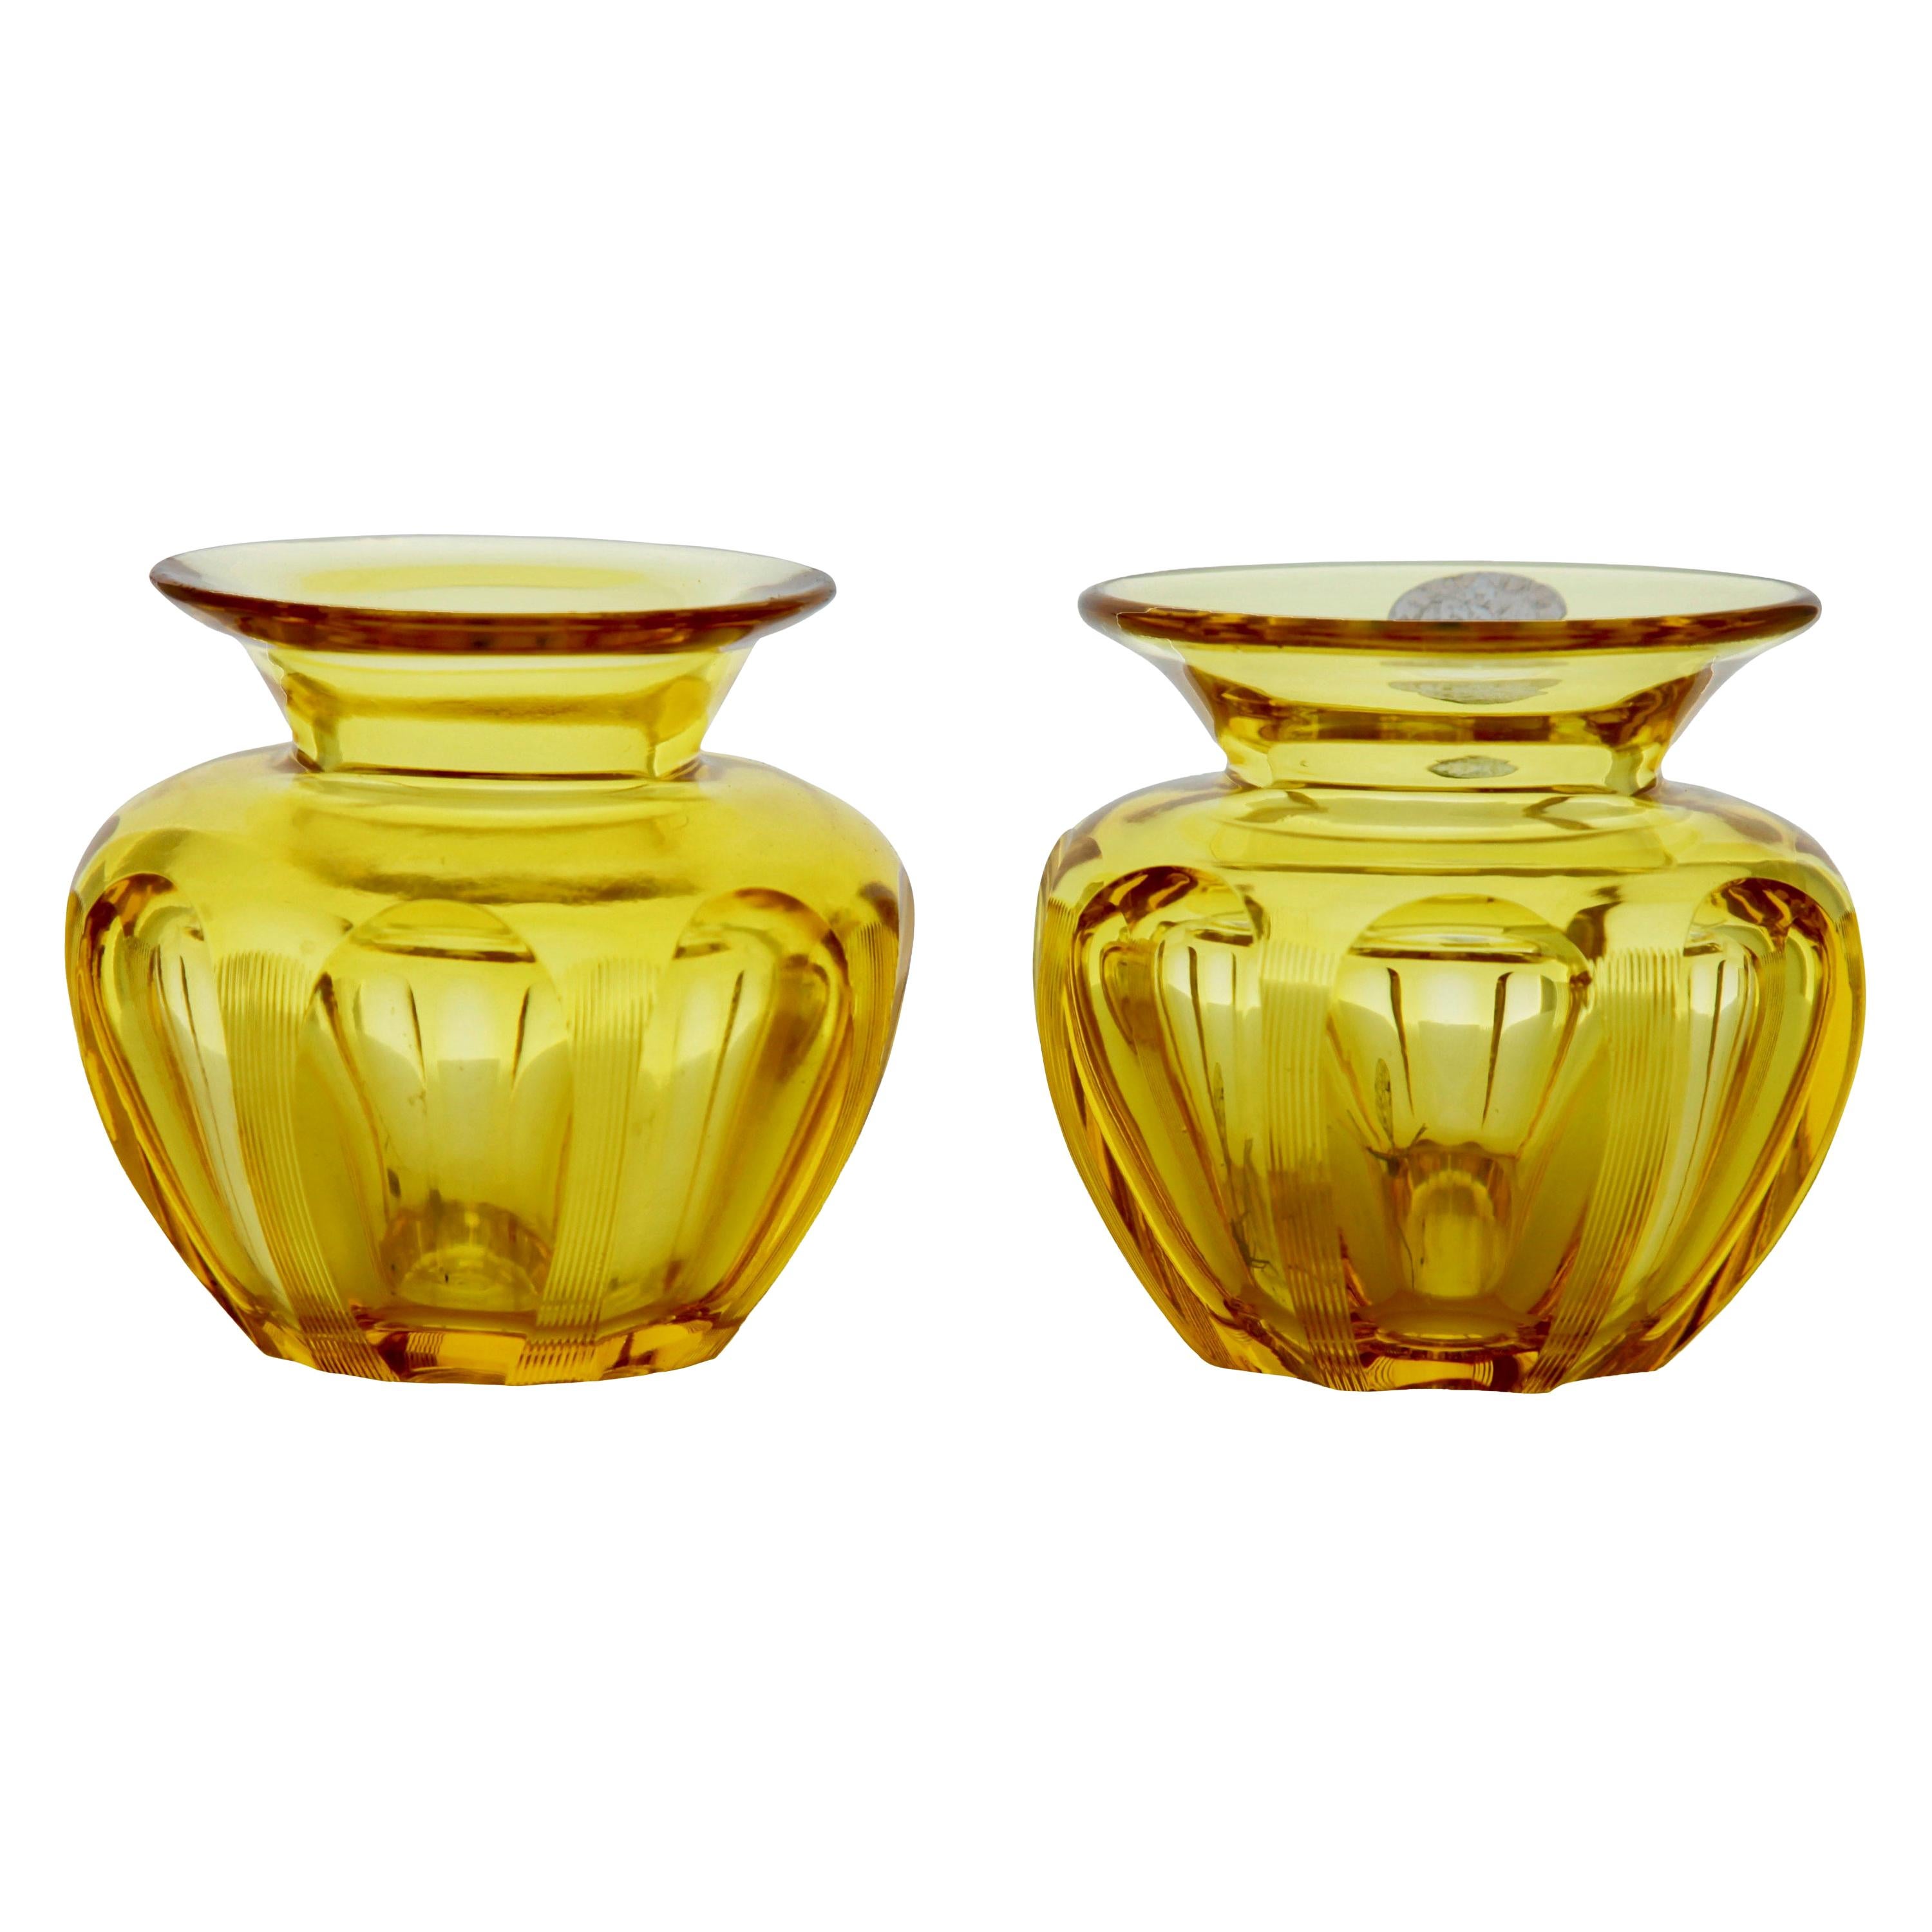 Gold-Amber Matching Pair of Cut Crystal Table Vases, with Sticker WMF